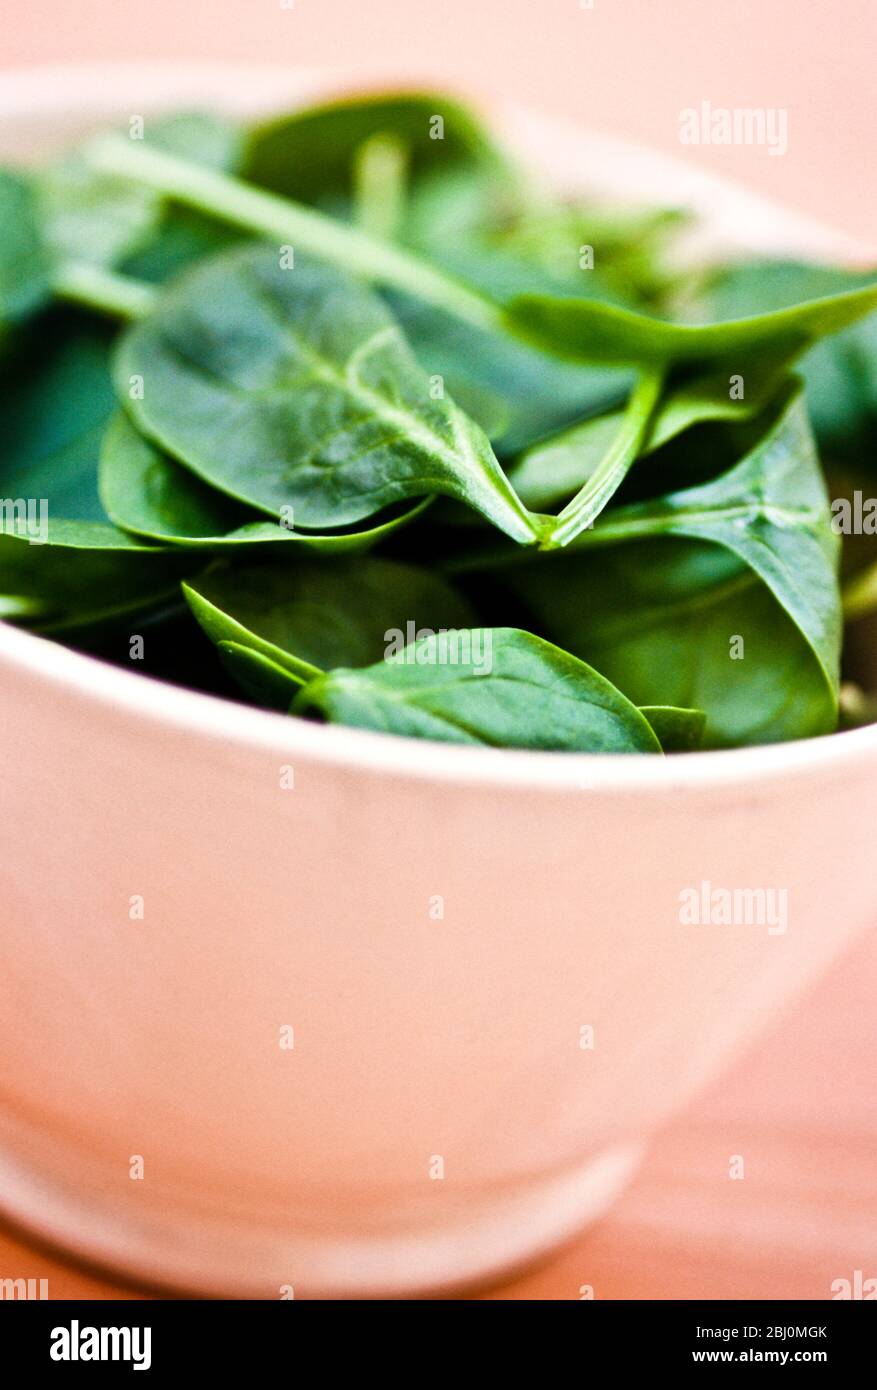 Bowl of fresh green baby spinach leaves - Stock Photo